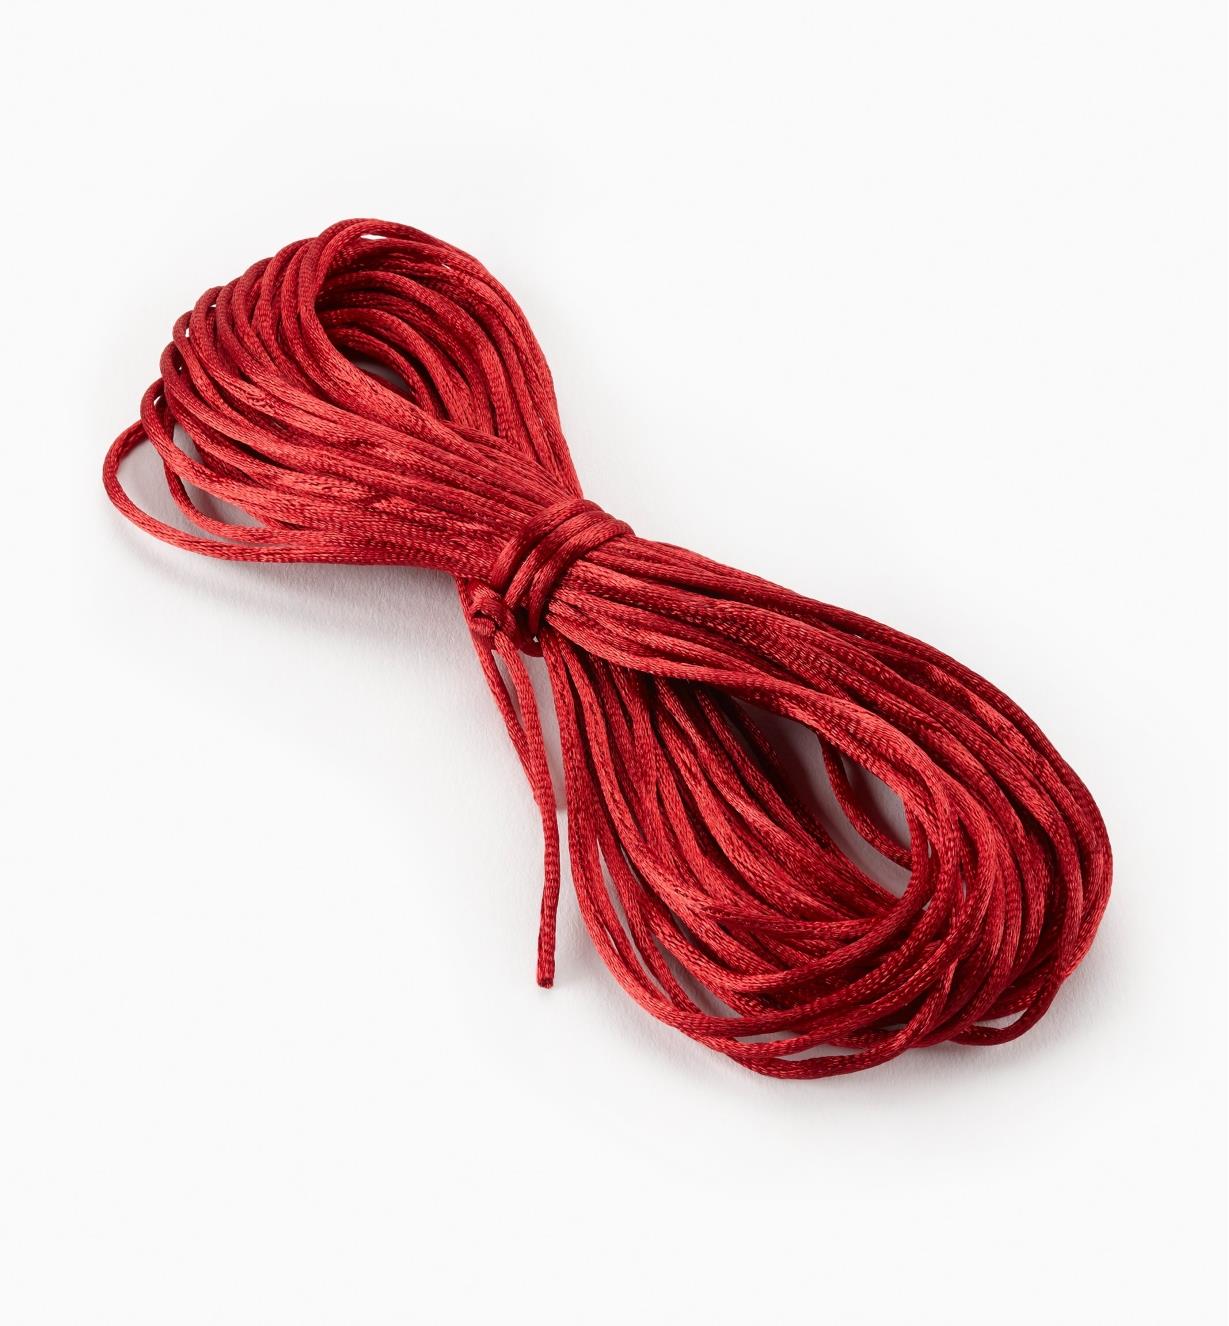 09A0706 - Red Rattail Cord